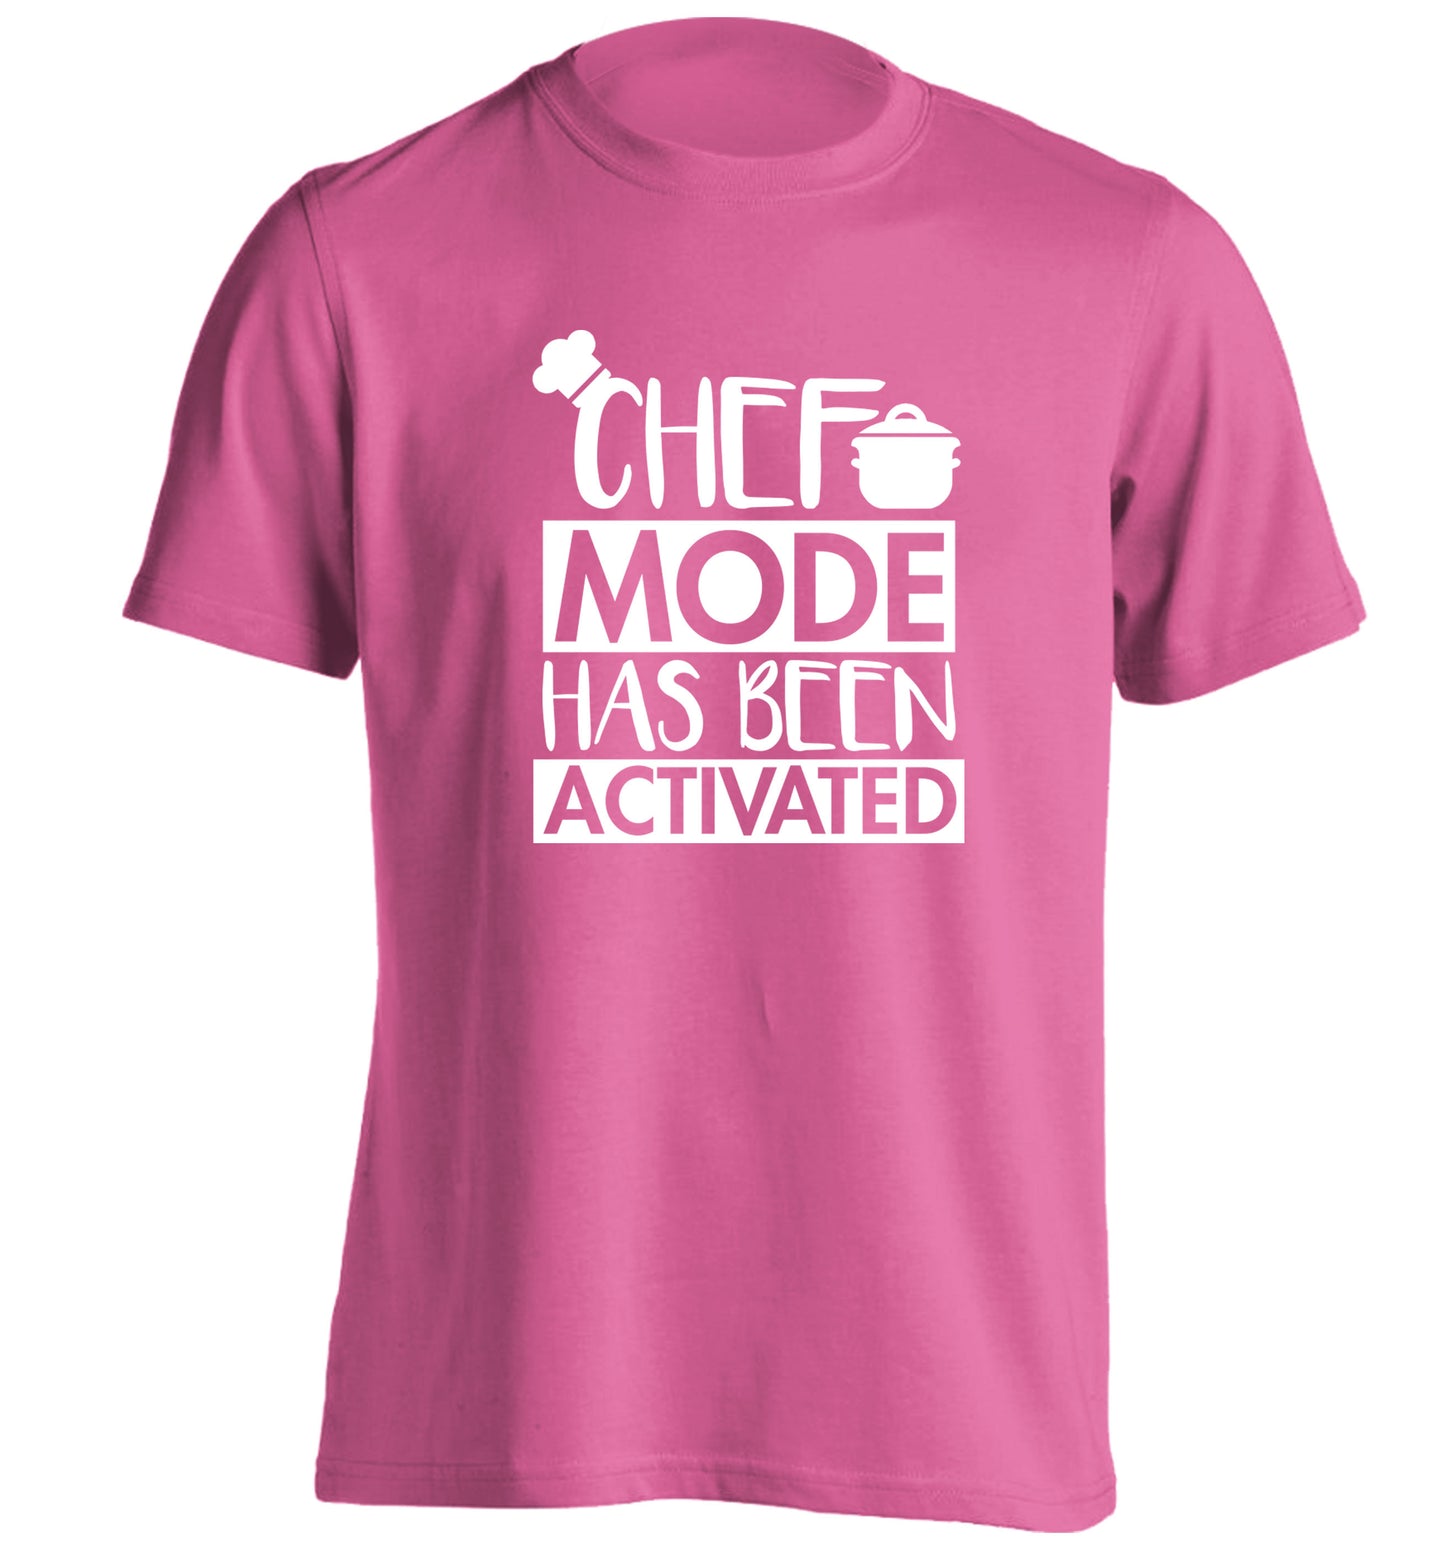 Chef mode has been activated adults unisex pink Tshirt 2XL